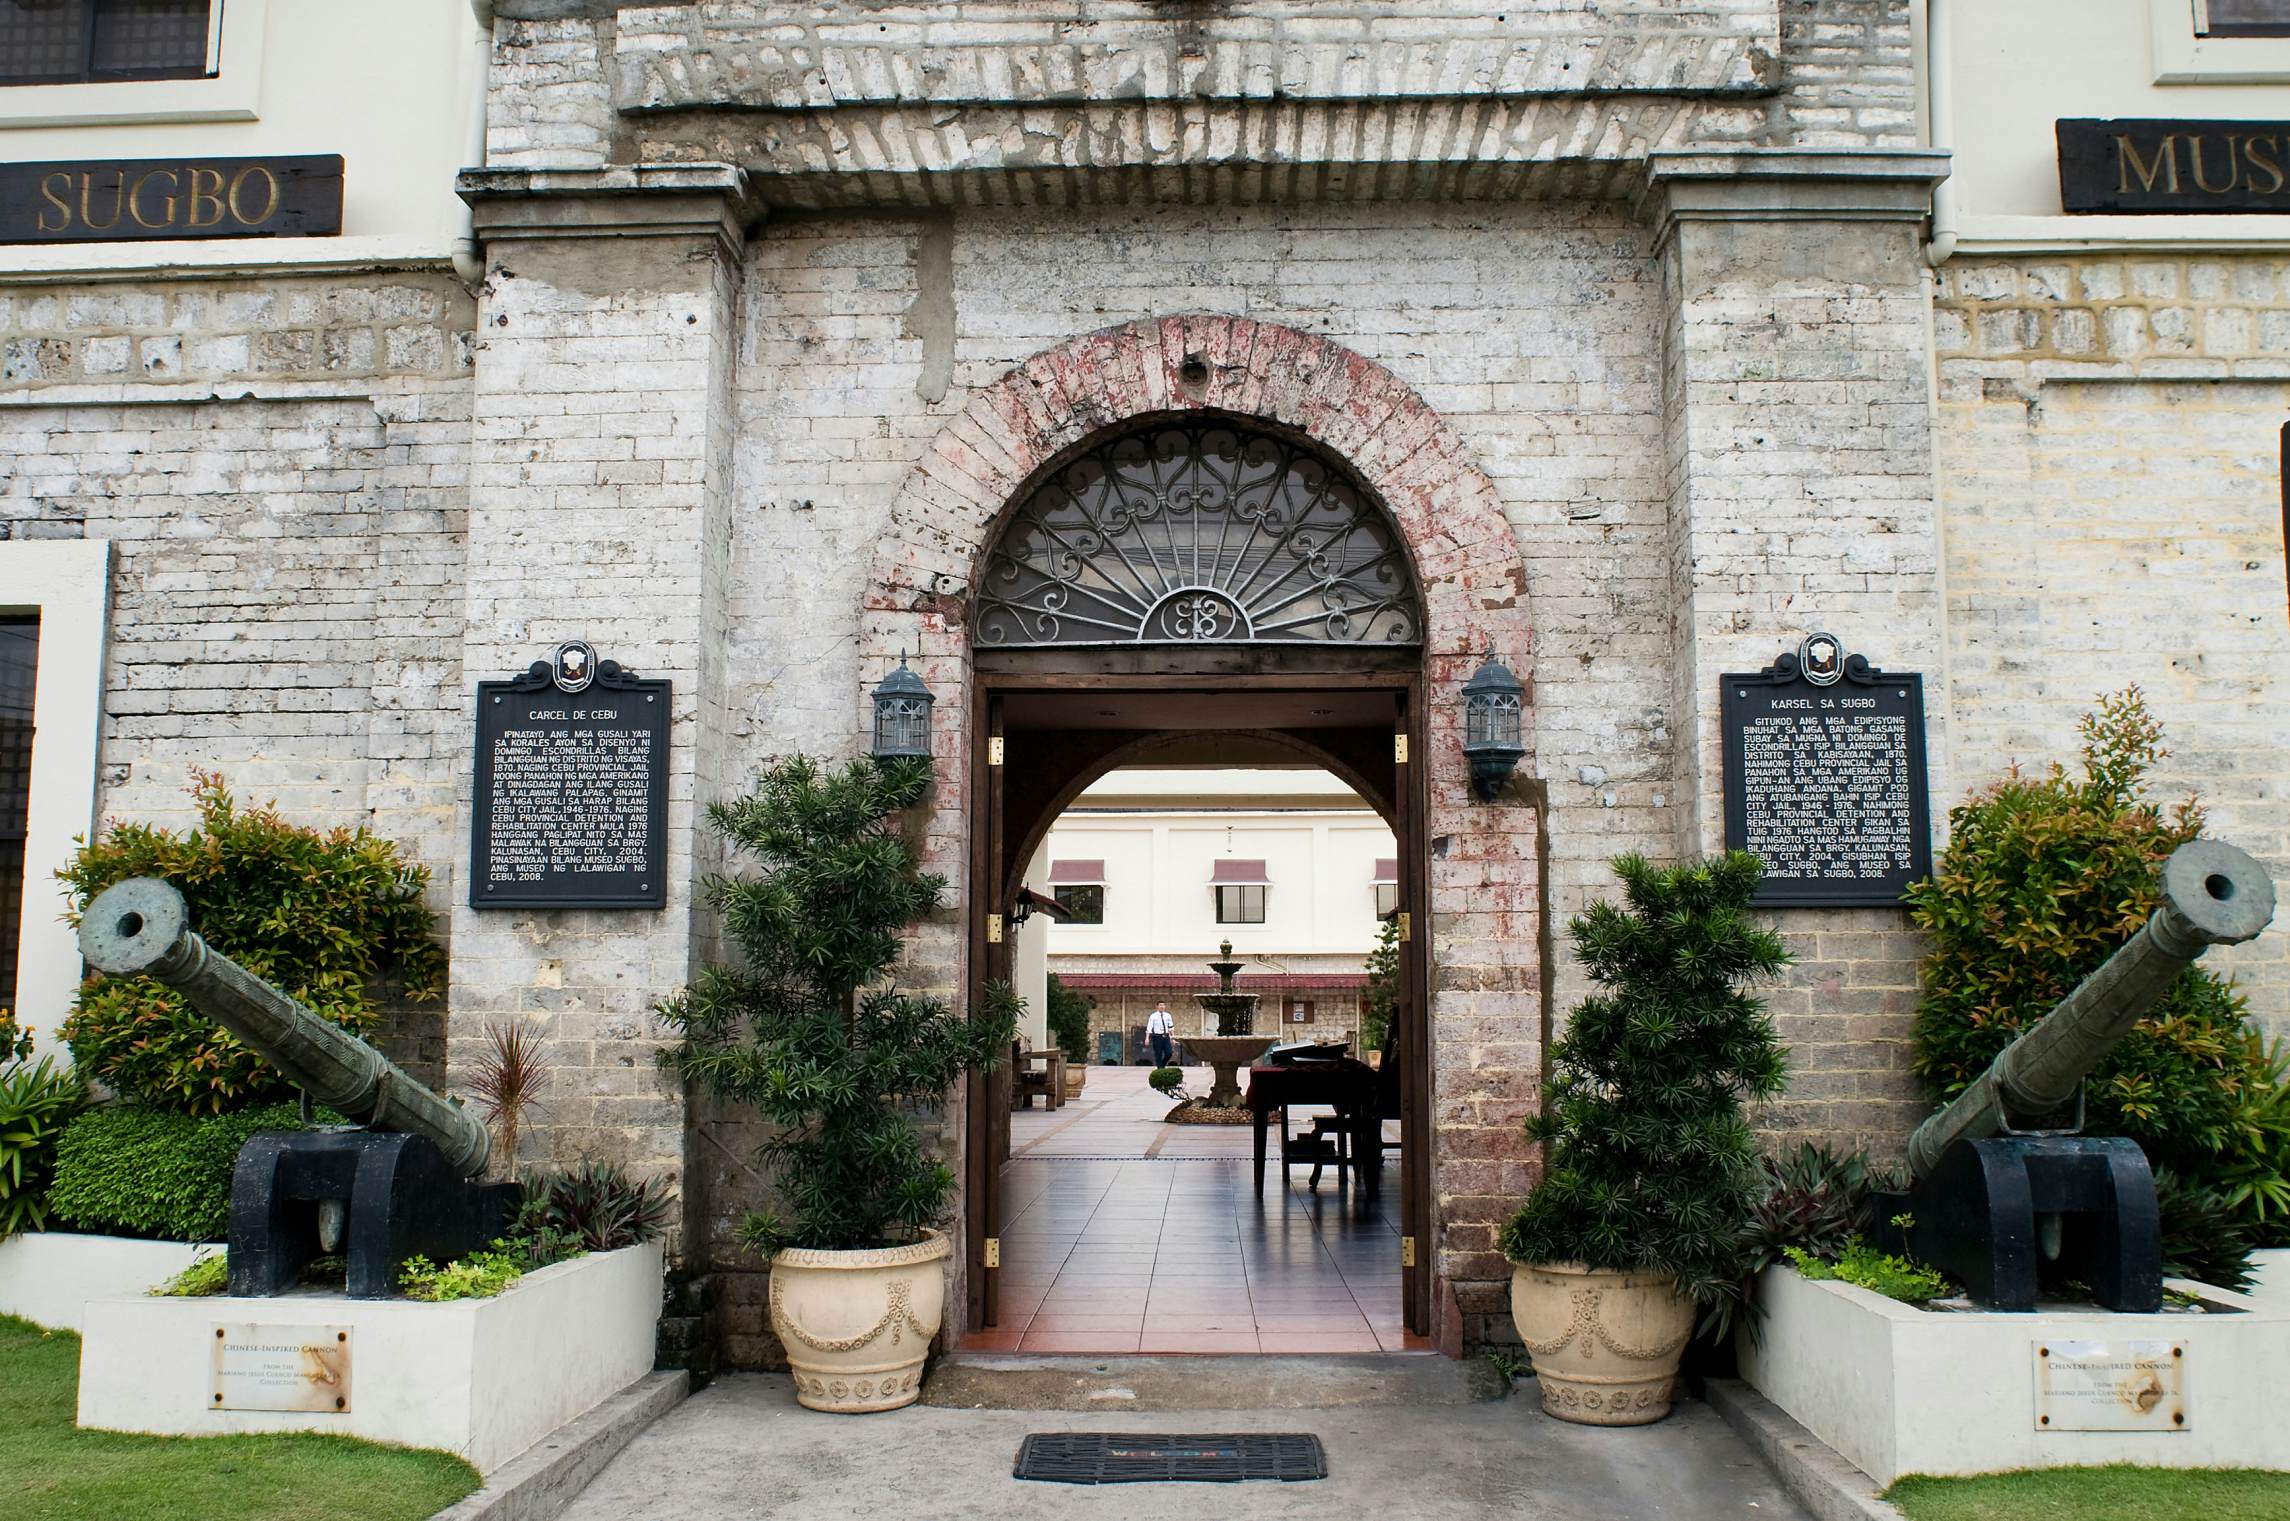 Museo Sugbo | Cebu City, Philippines Attractions - Lonely Planet